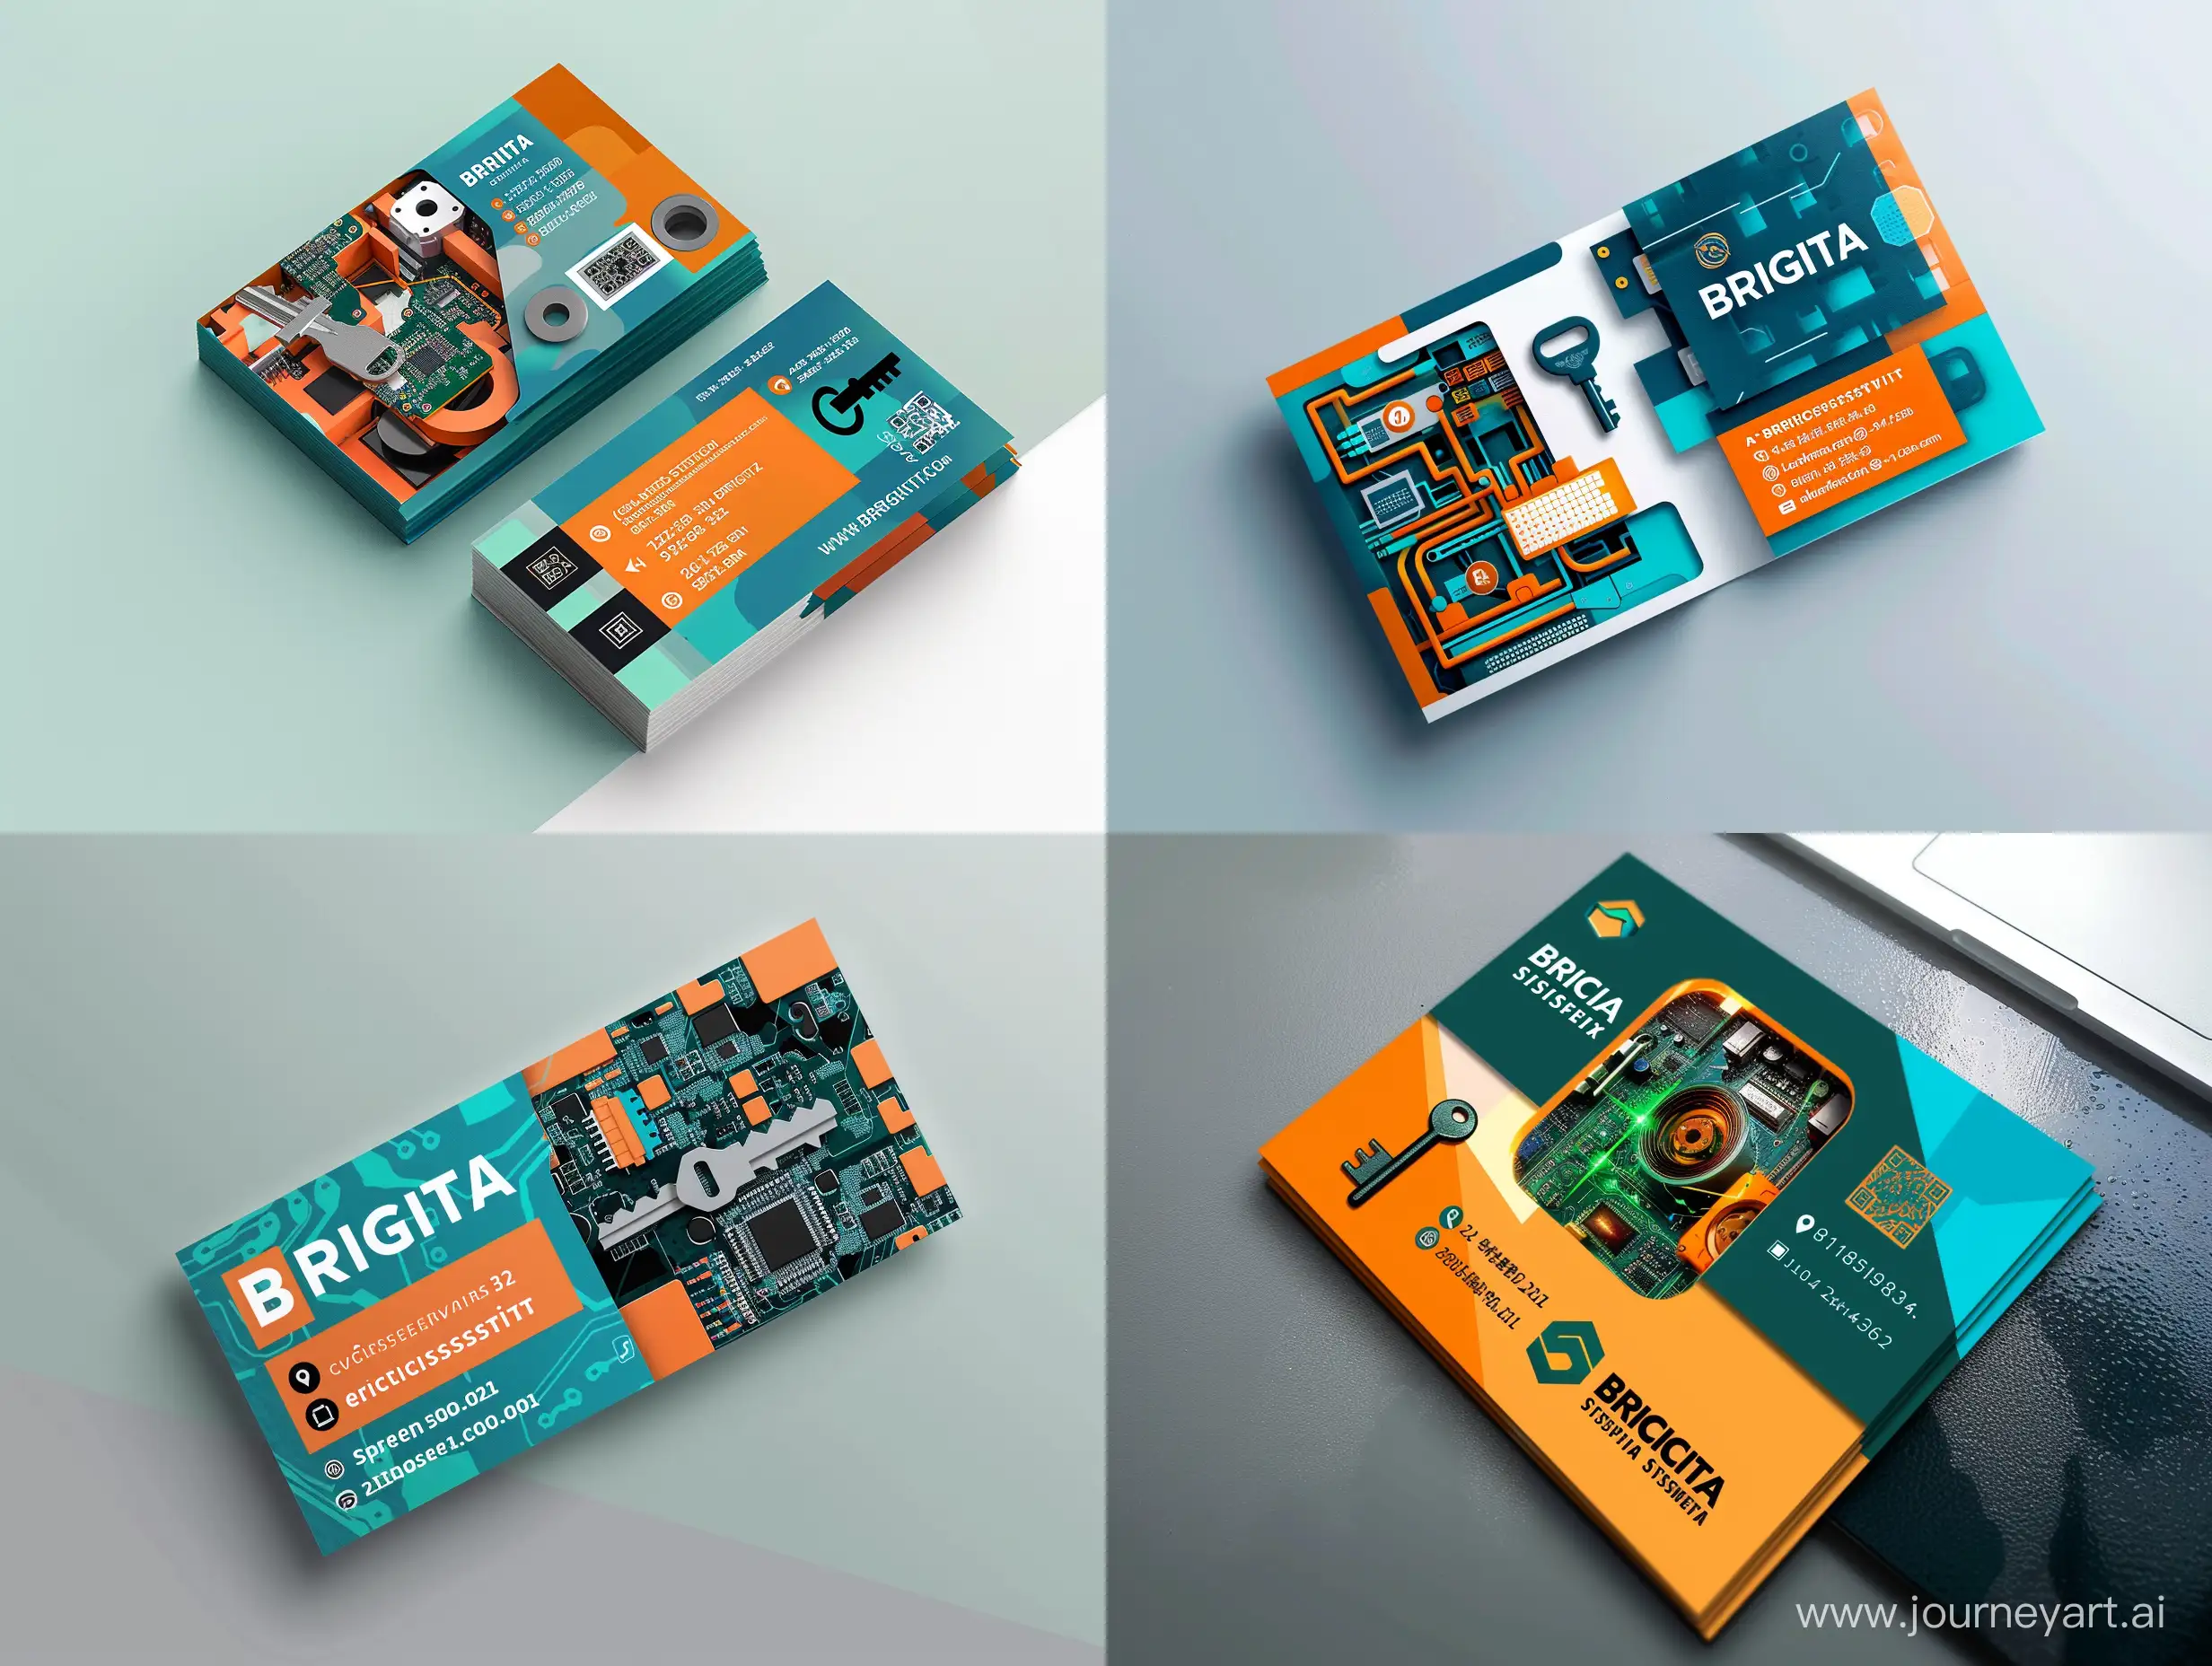 BRIGITA-Cybersecurity-Systems-Engineer-Business-Card-with-Computer-Parts-and-Security-Key